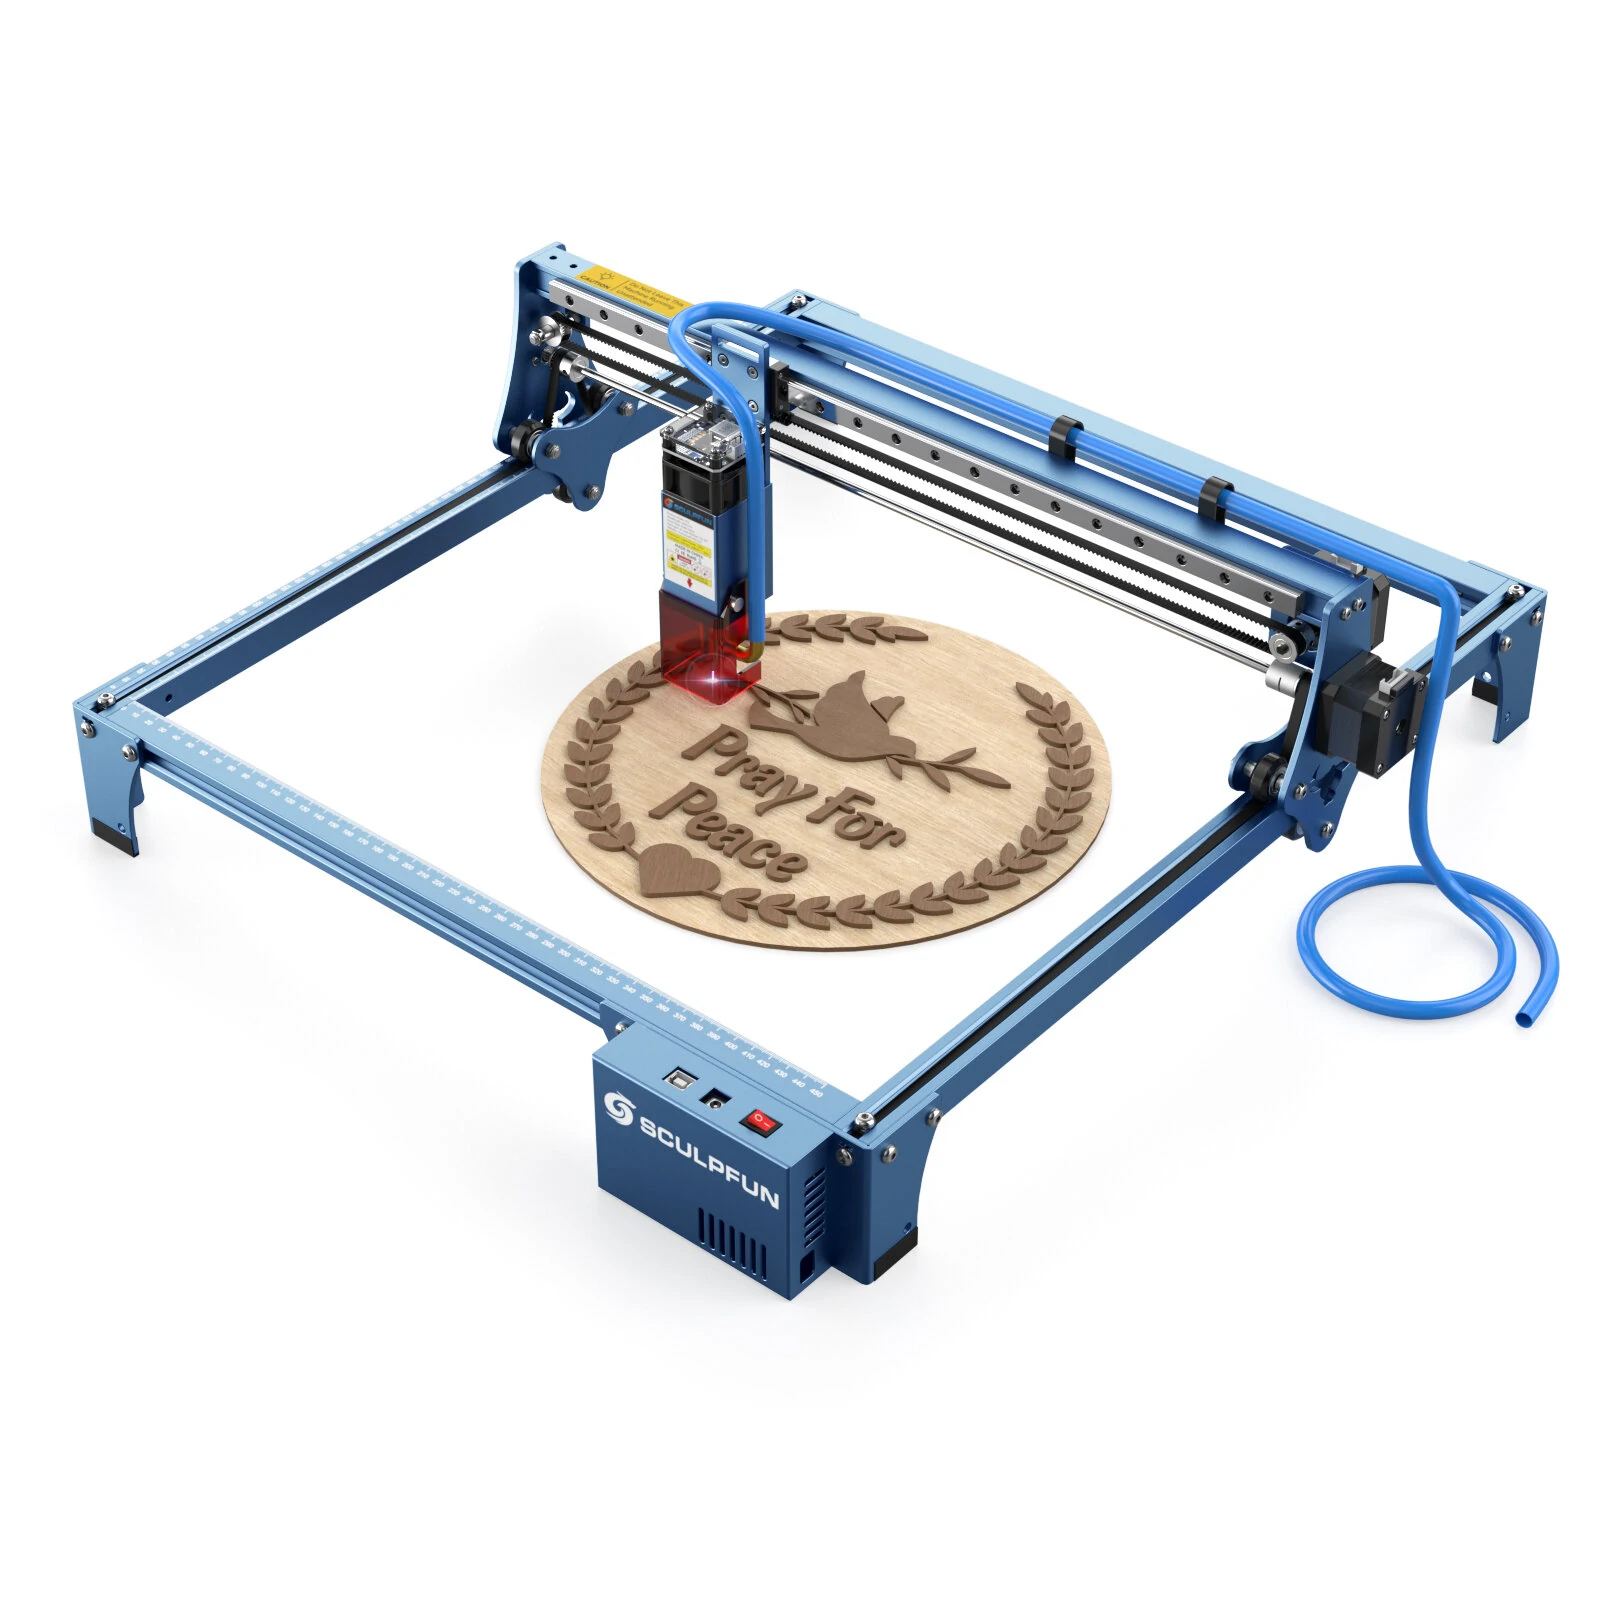 SCULPFUN S10 10W Laser Engraver Cutter 0.08mm High Precision Air Assist 32Bit Motherboard Upgraded Linear Rail Slide Full-Metal CNC Engraving Area 410*400mm